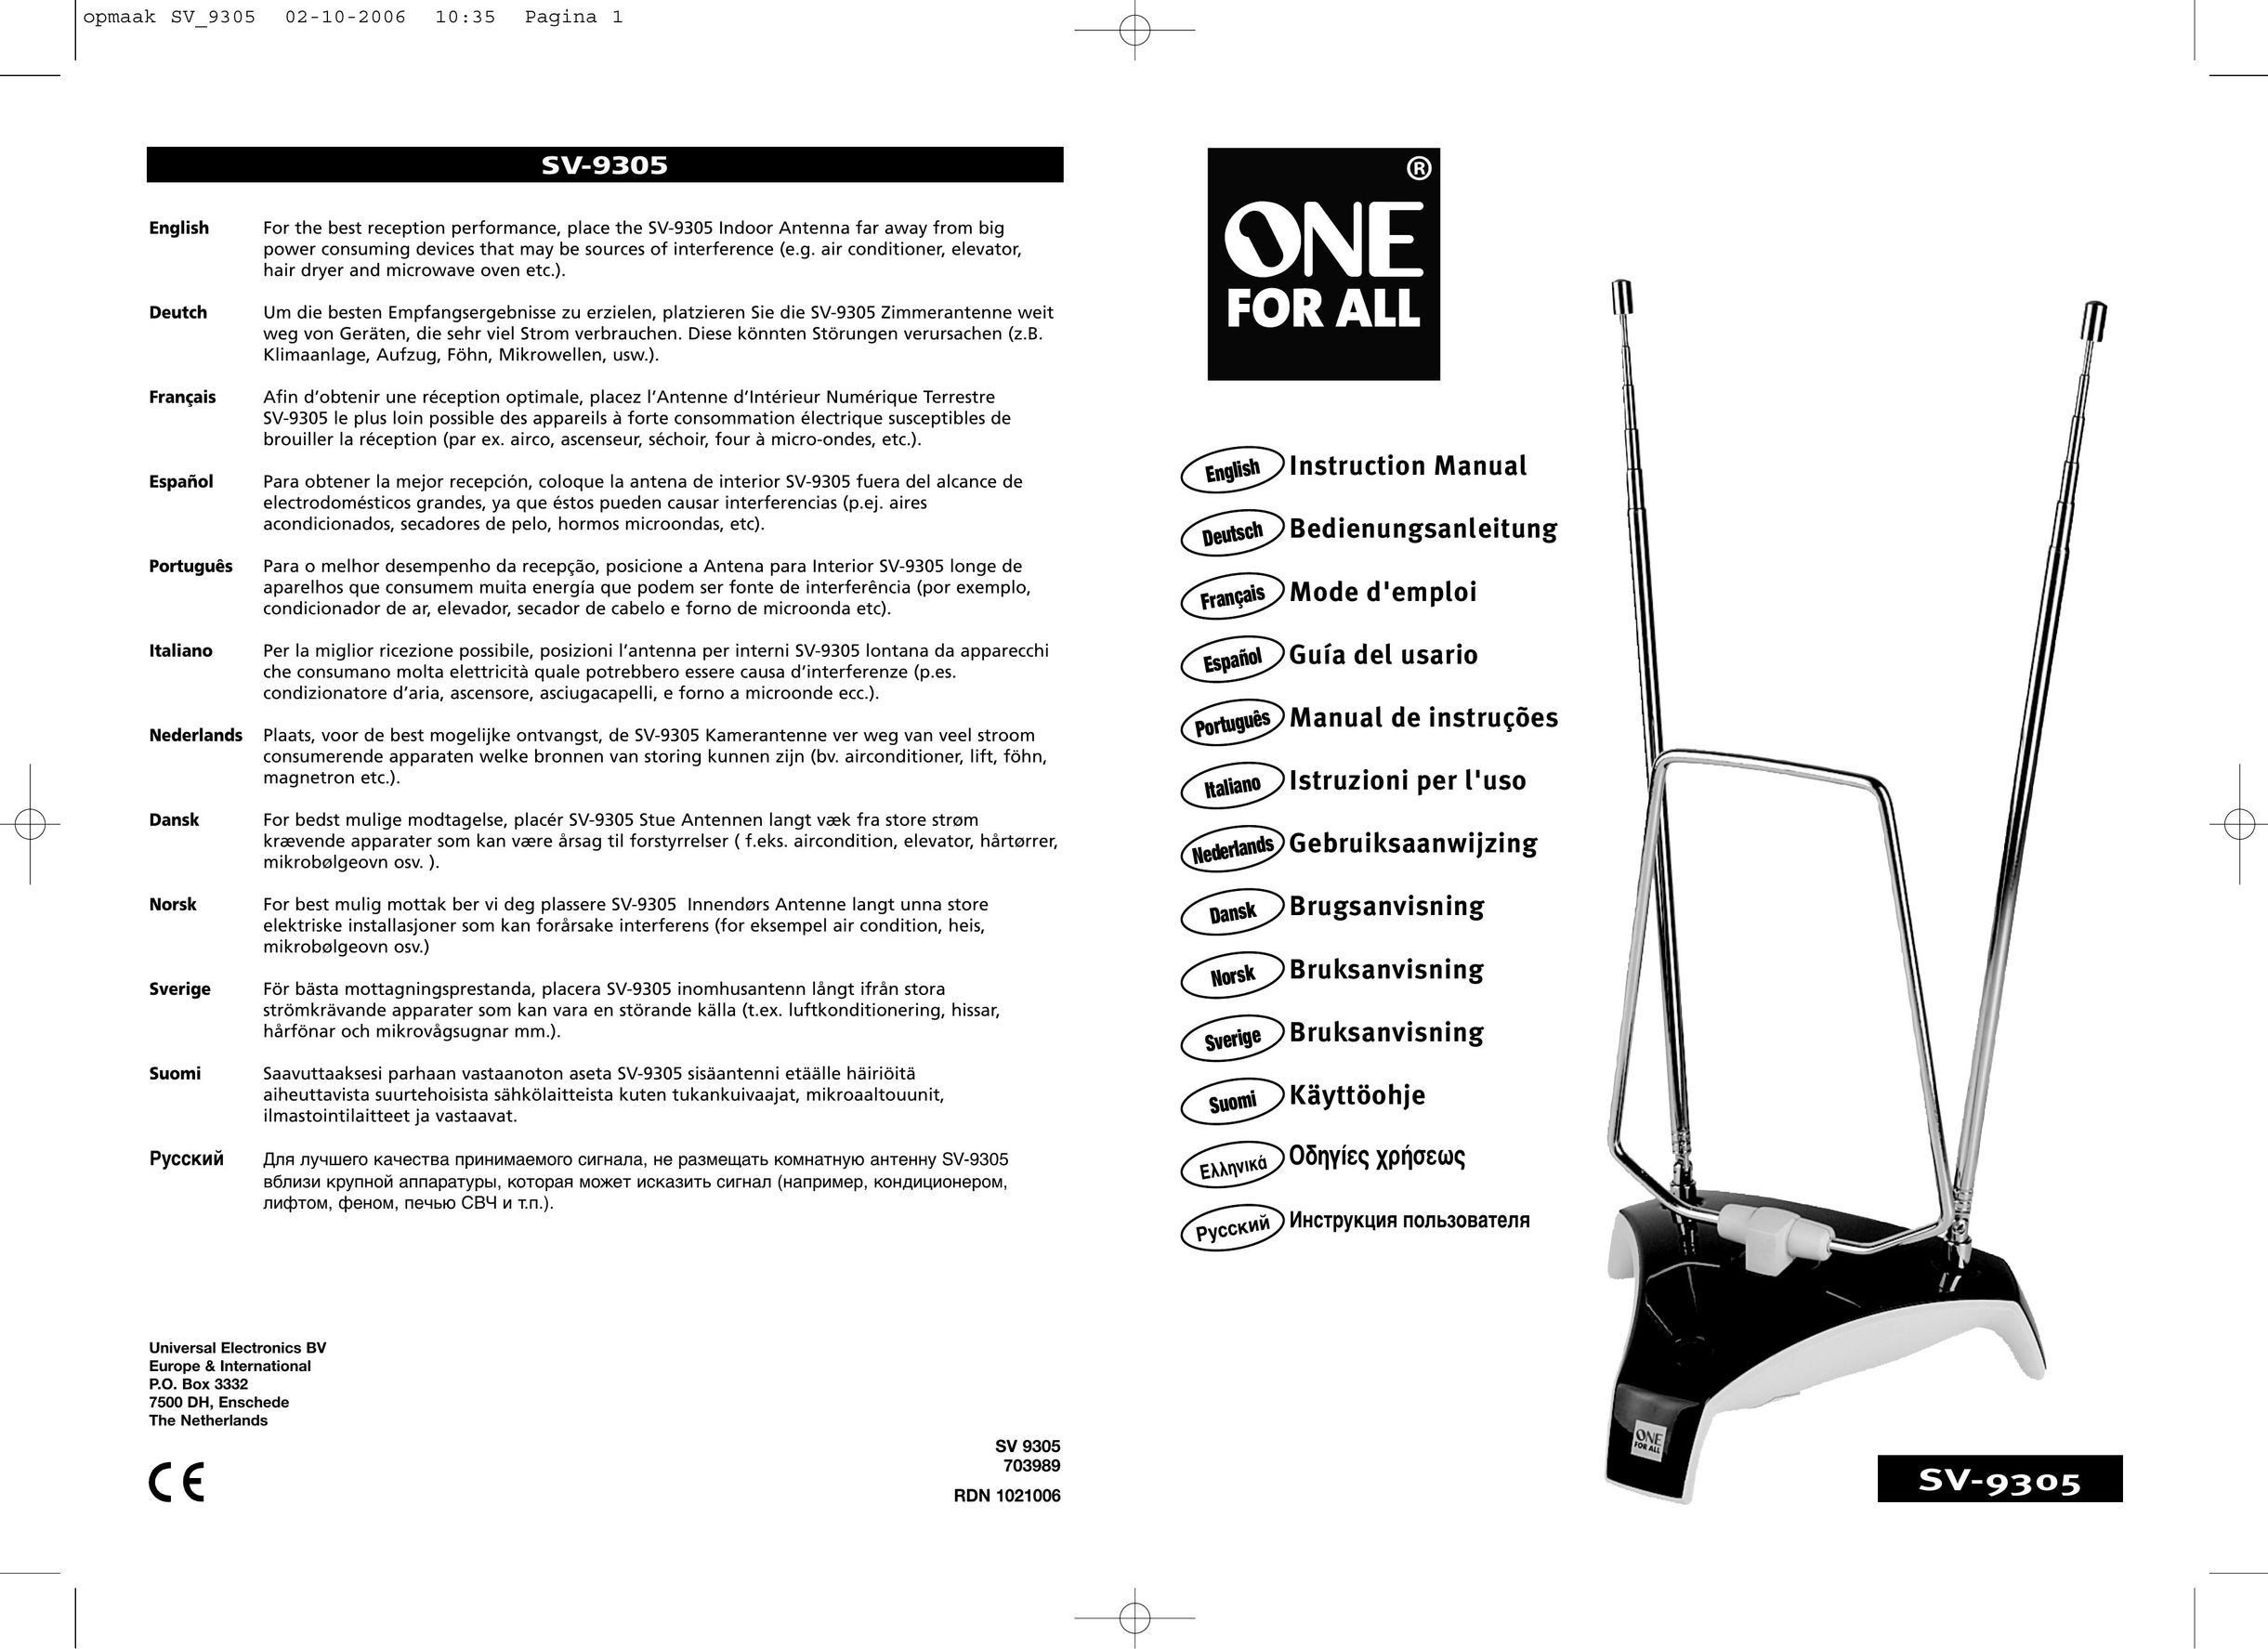 One for All SV-9305 TV Video Accessories User Manual